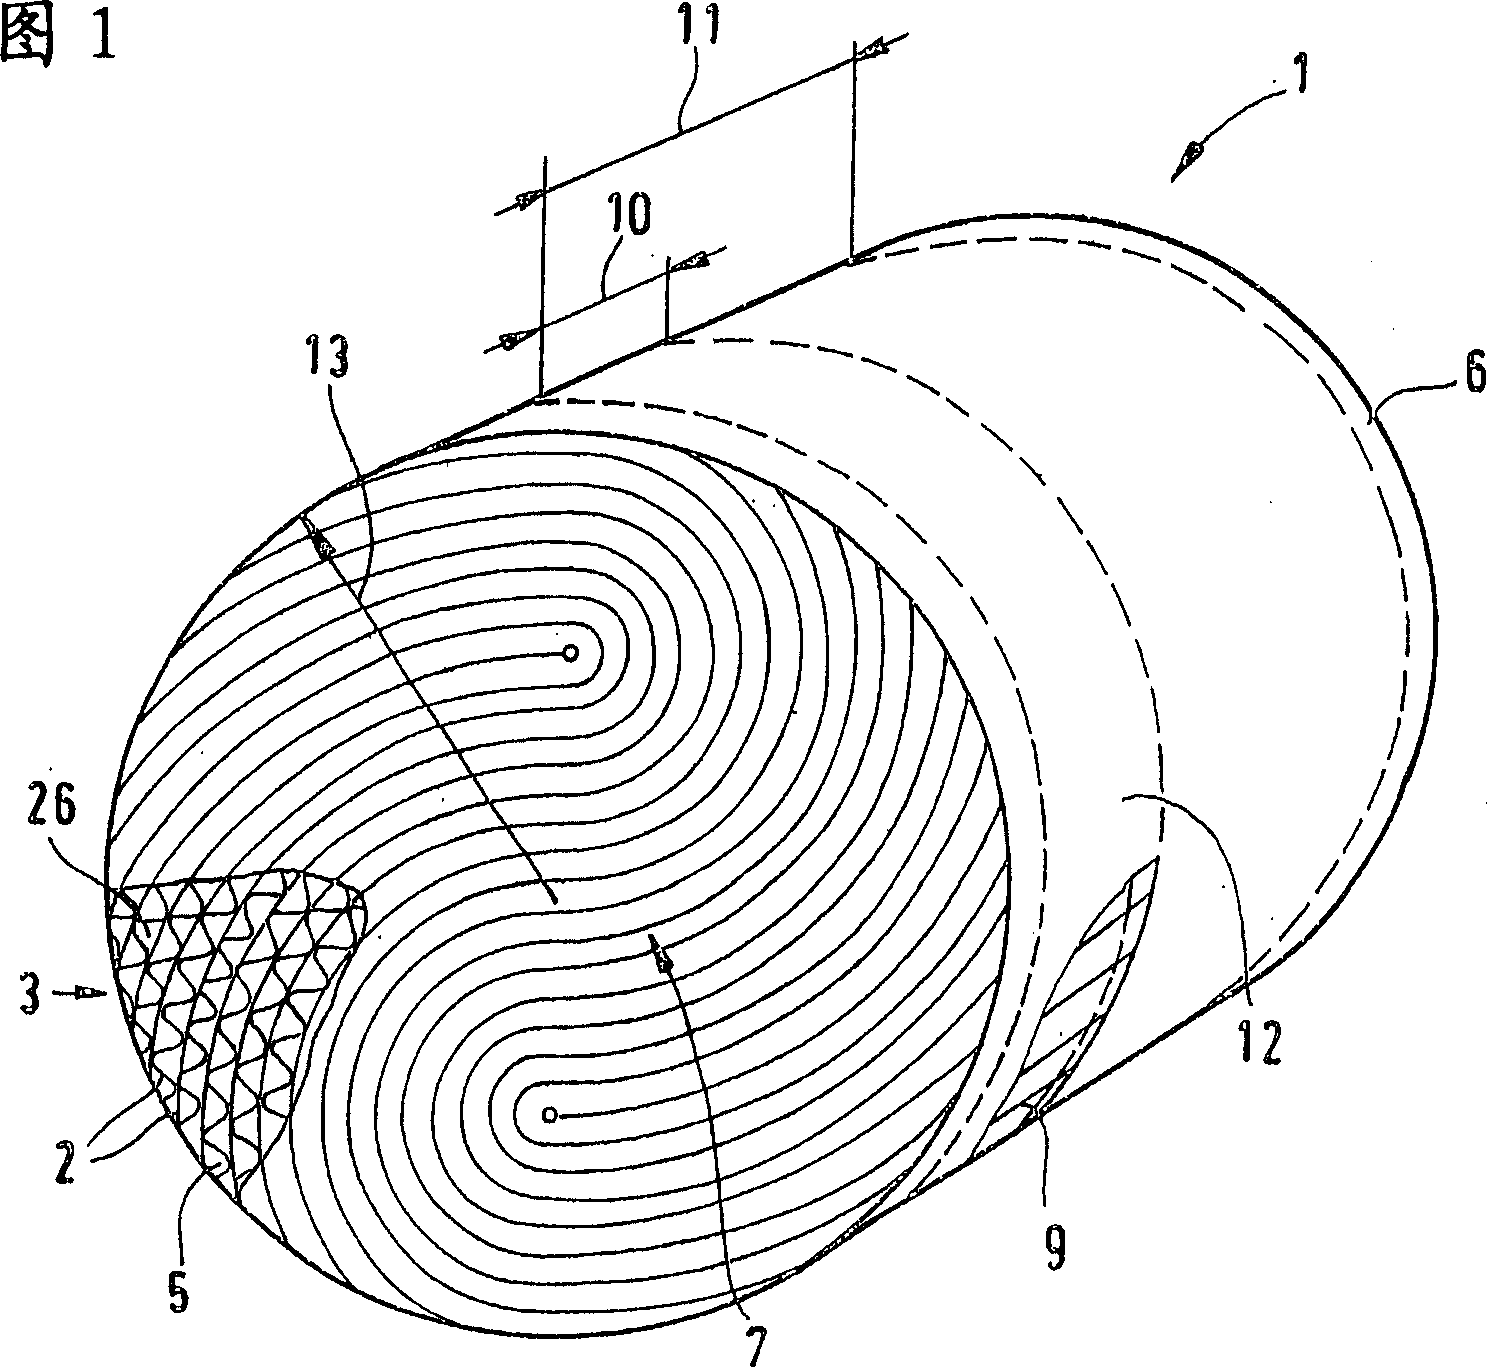 Method for the production of aluminum-containing honeycomb bodies with the aid of radiant heaters